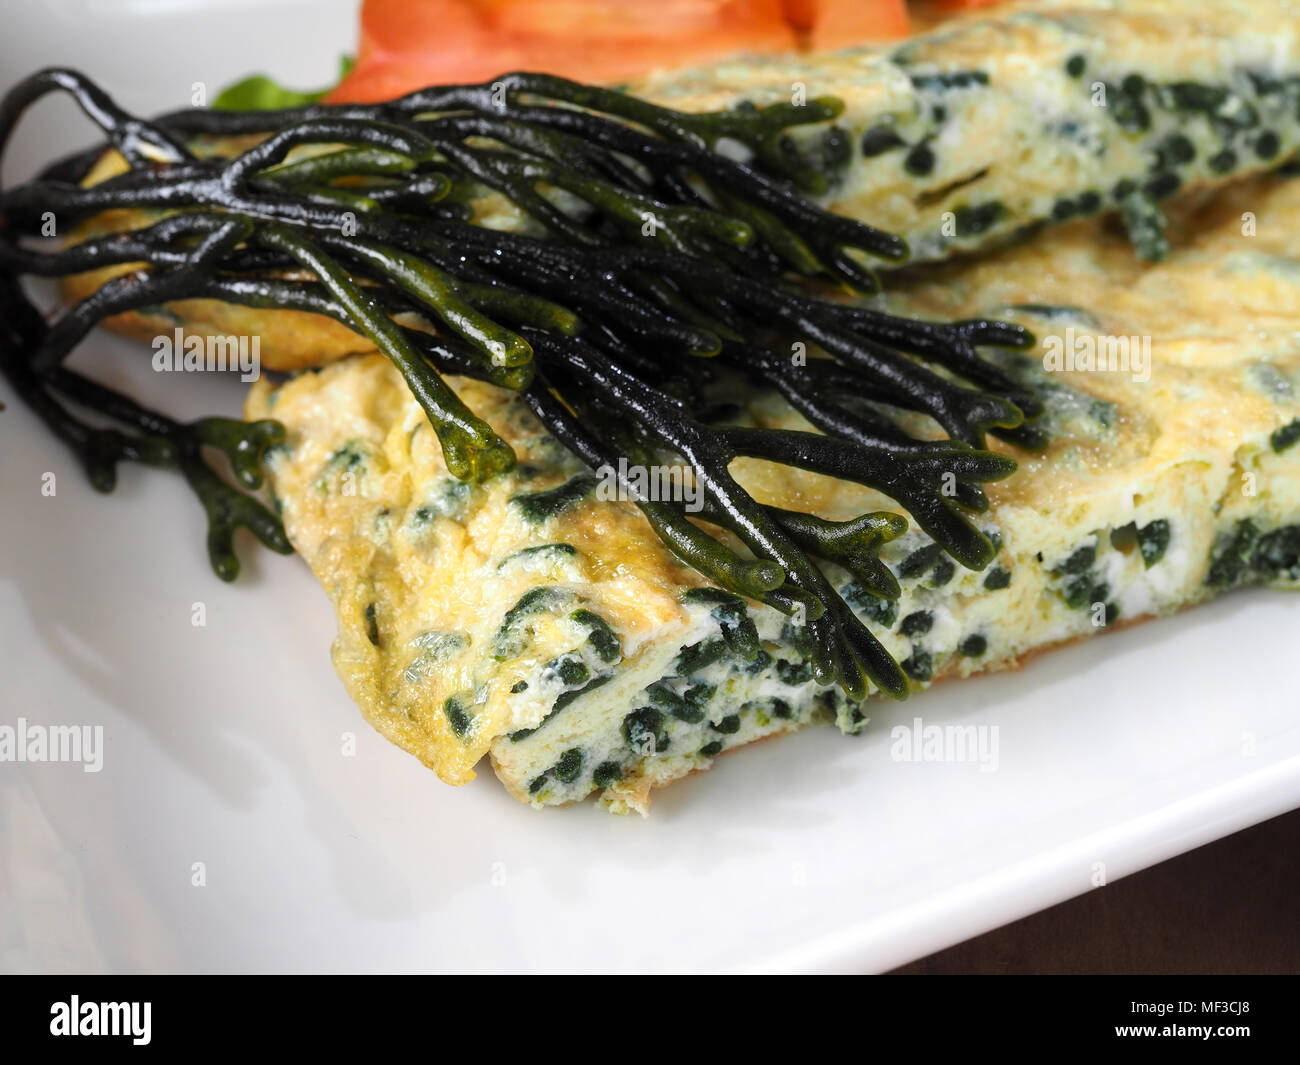 Codium – Velvet horn – Spongeweed cooked in Omelette.  Edible green seaweed in the family Codiaceae. Binomial name: Codium tomentosum. There are about Stock Photo